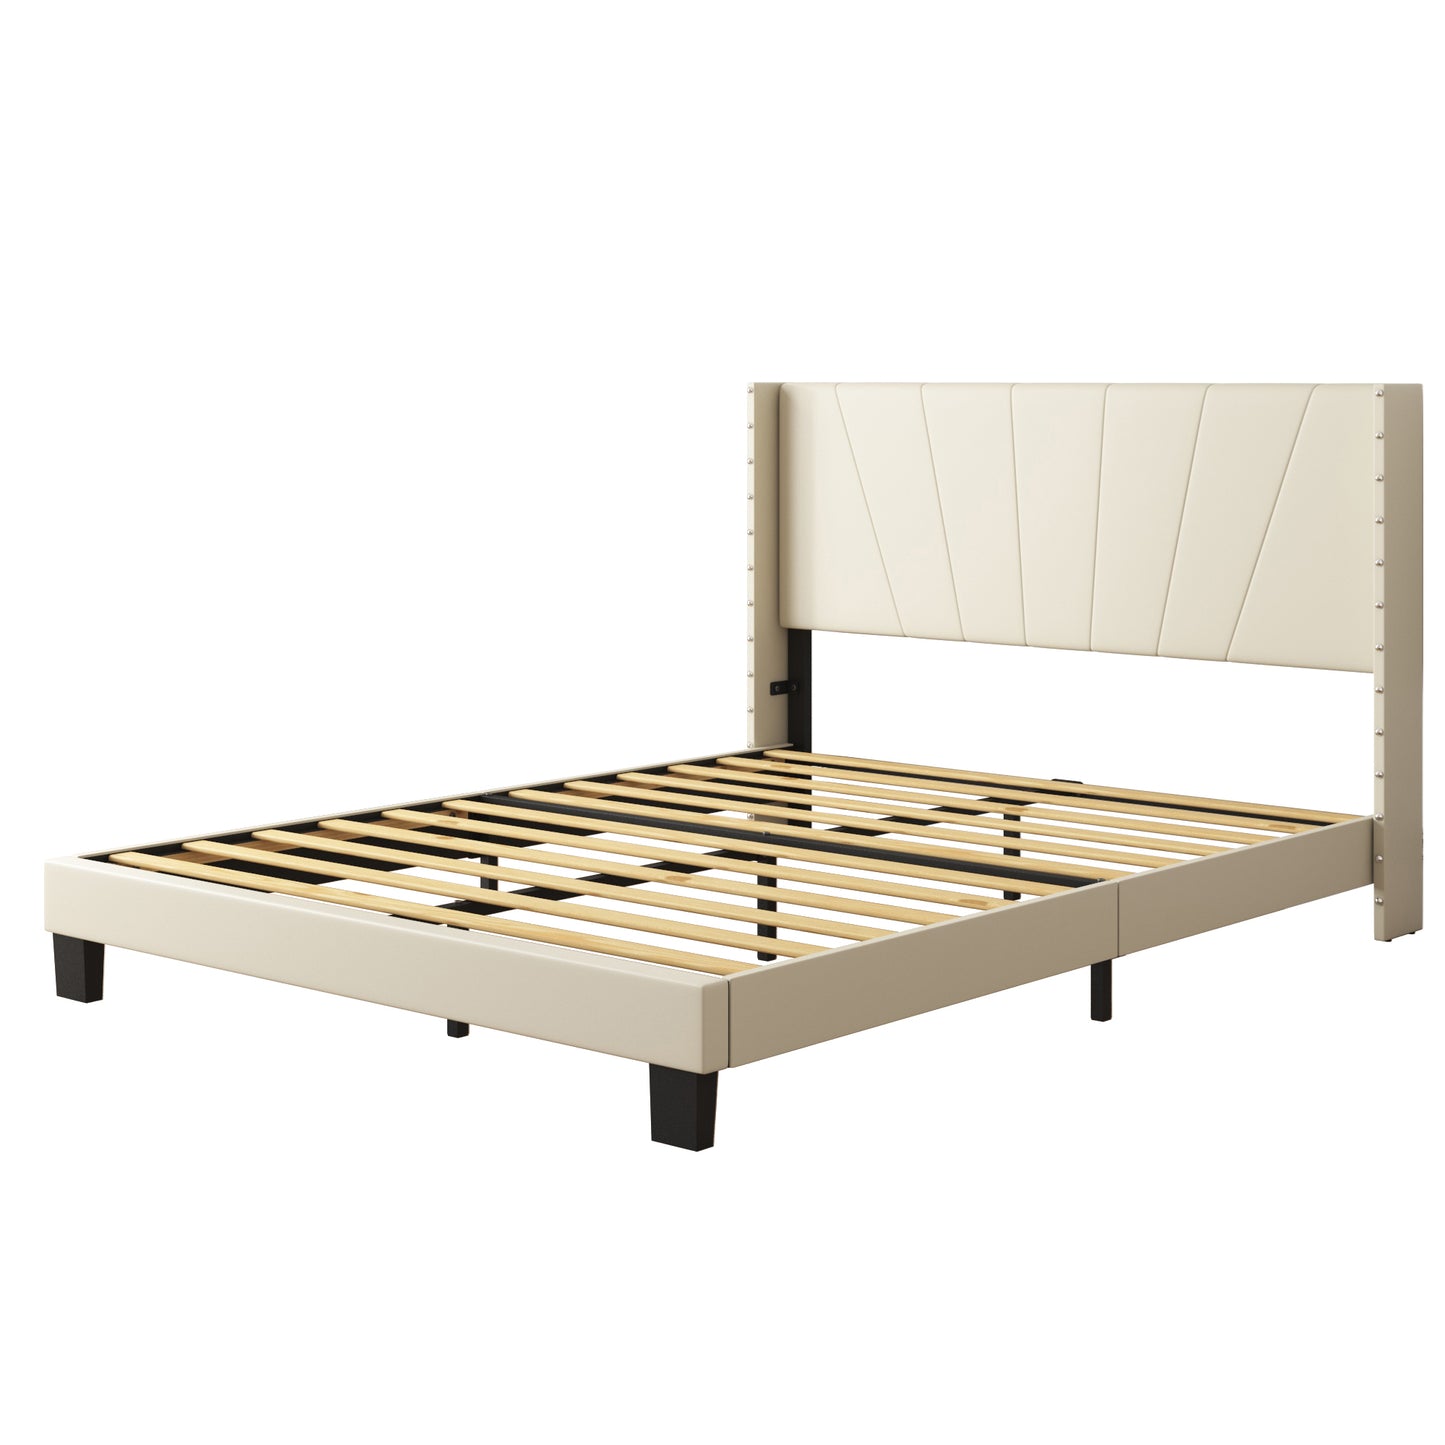 SYNGAR Beige Fabric Upholstered Platform Bed Frame Queen Size with Rivet Wingback Headboard, Mattress Foundation with Strong Wooden Slat Support for Kids Teens Adults, No Box Spring Needed